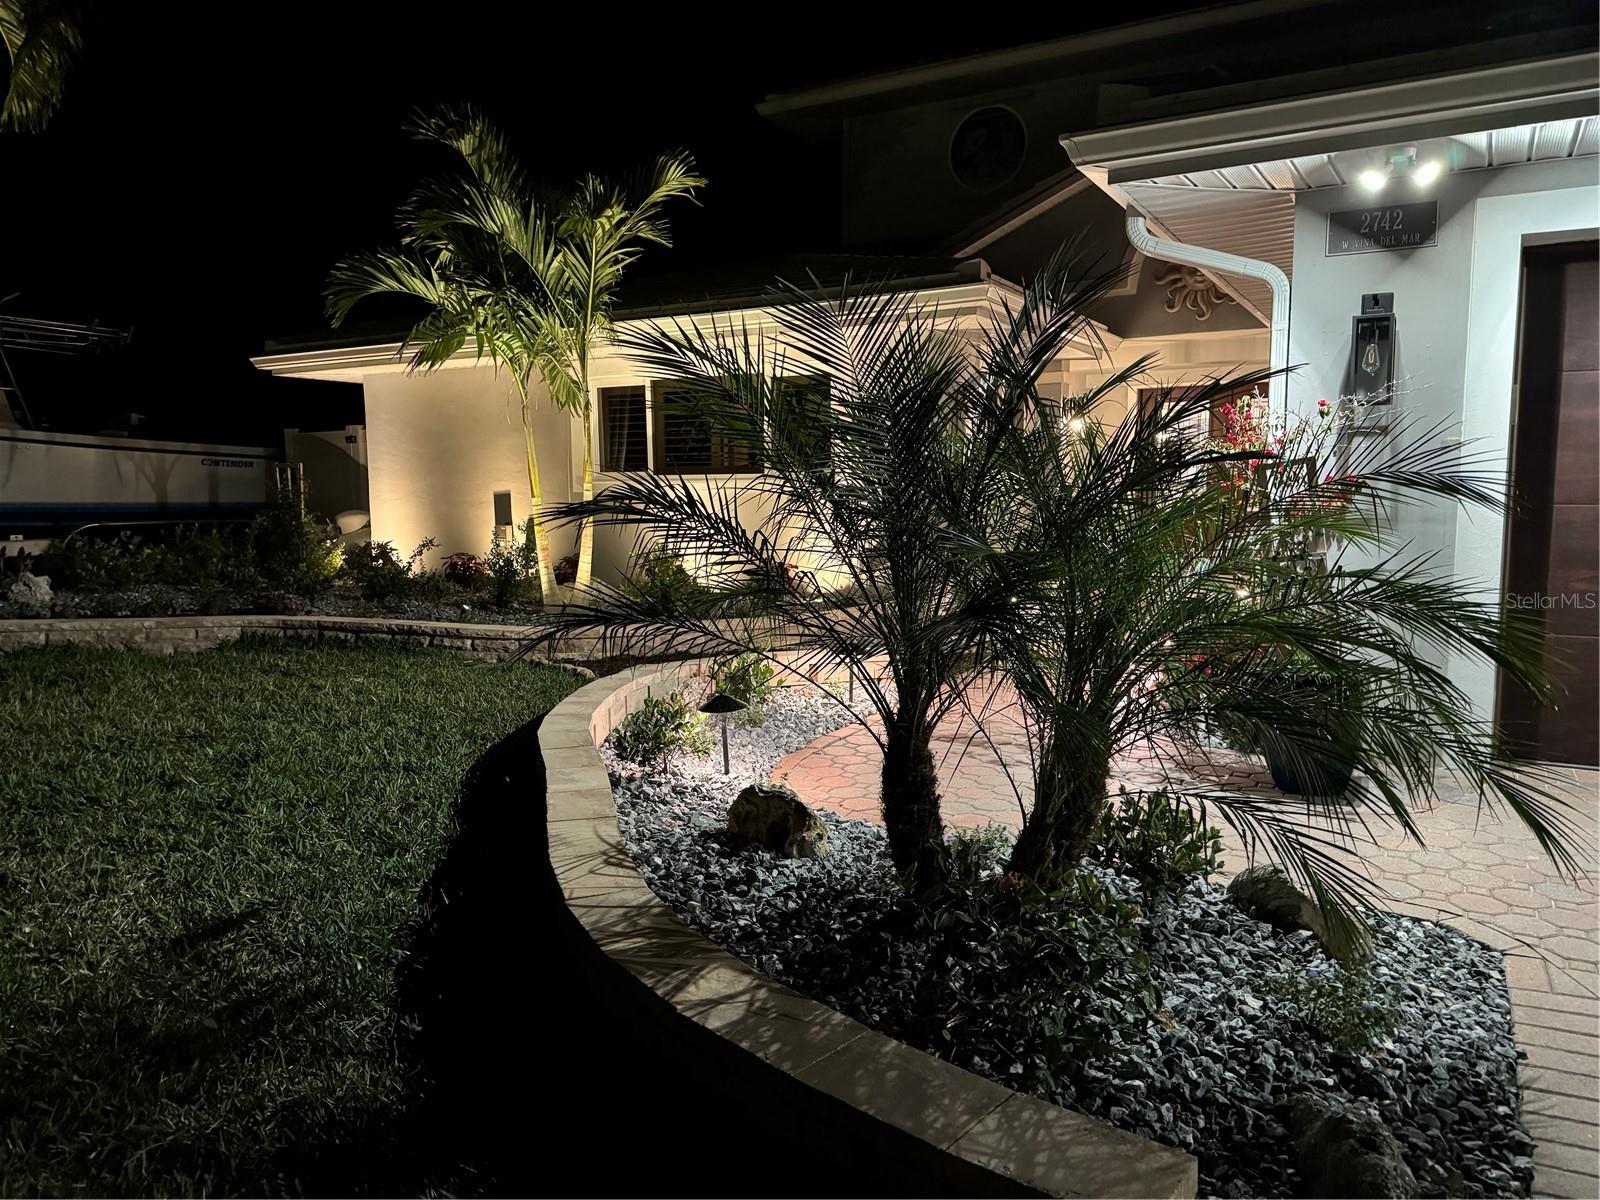 Landscaping at Night